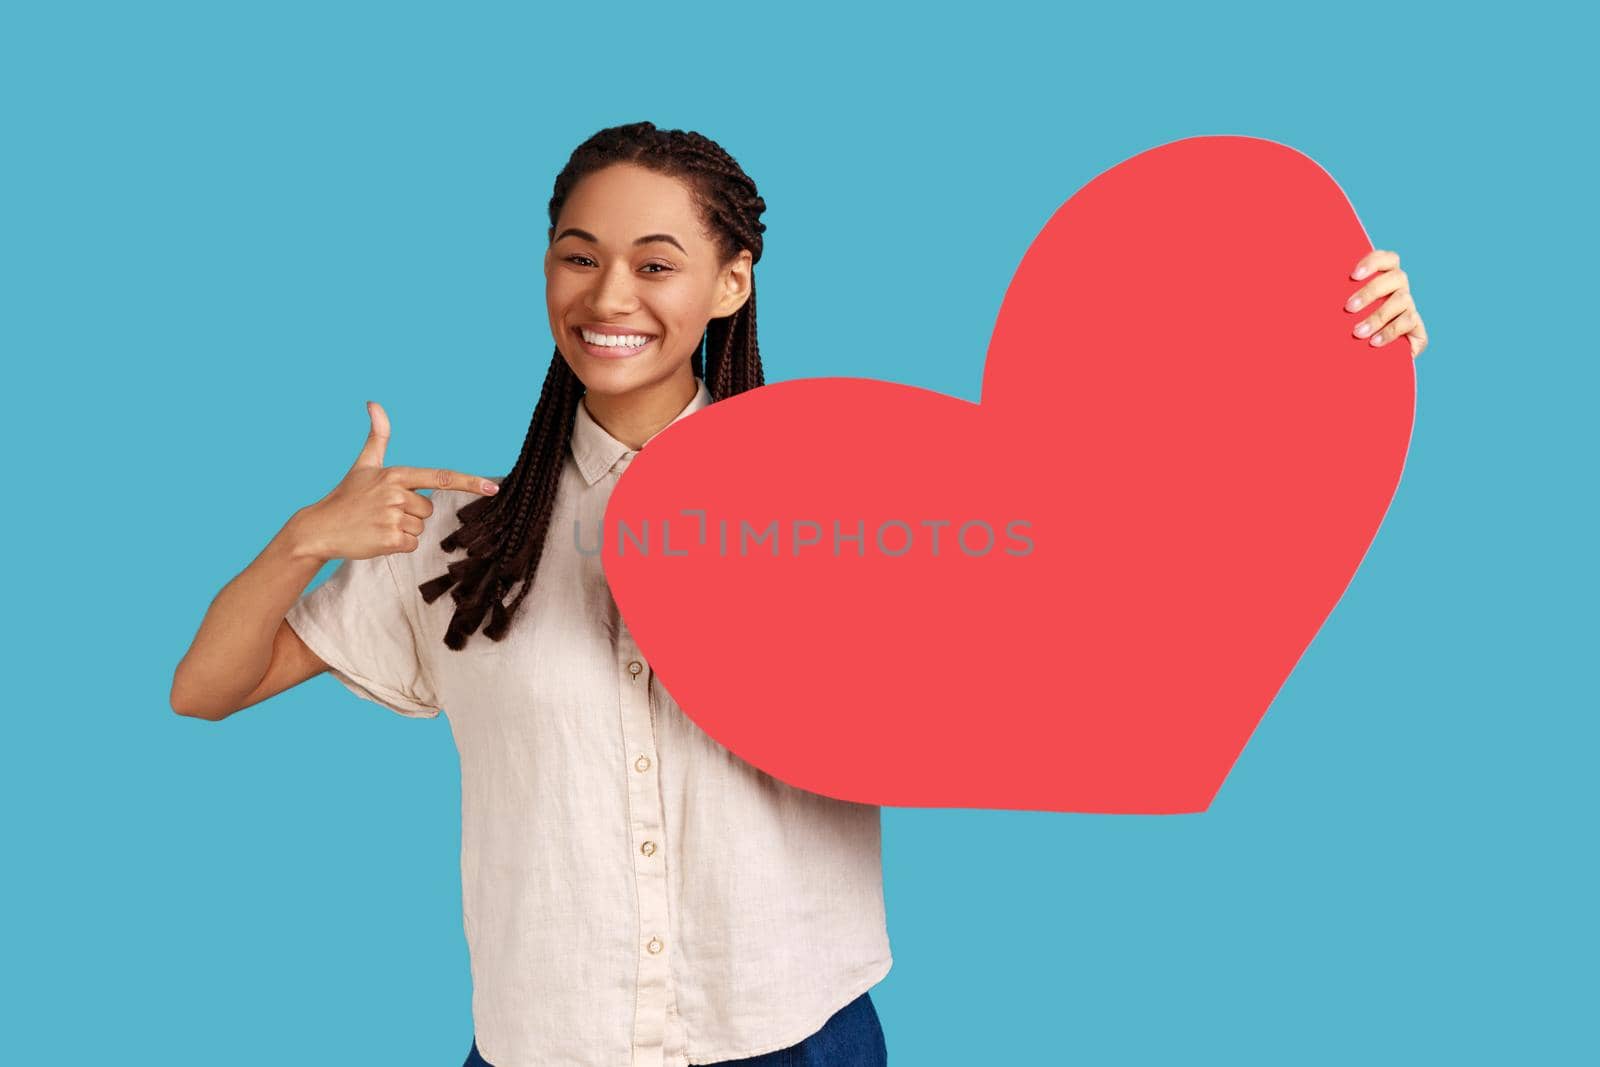 Portrait of enthusiastic woman with black dreadlocks pointing at big red paper heart and smiling, expressing extreme joy, greeting on valentines day. Indoor studio shot isolated on blue background.